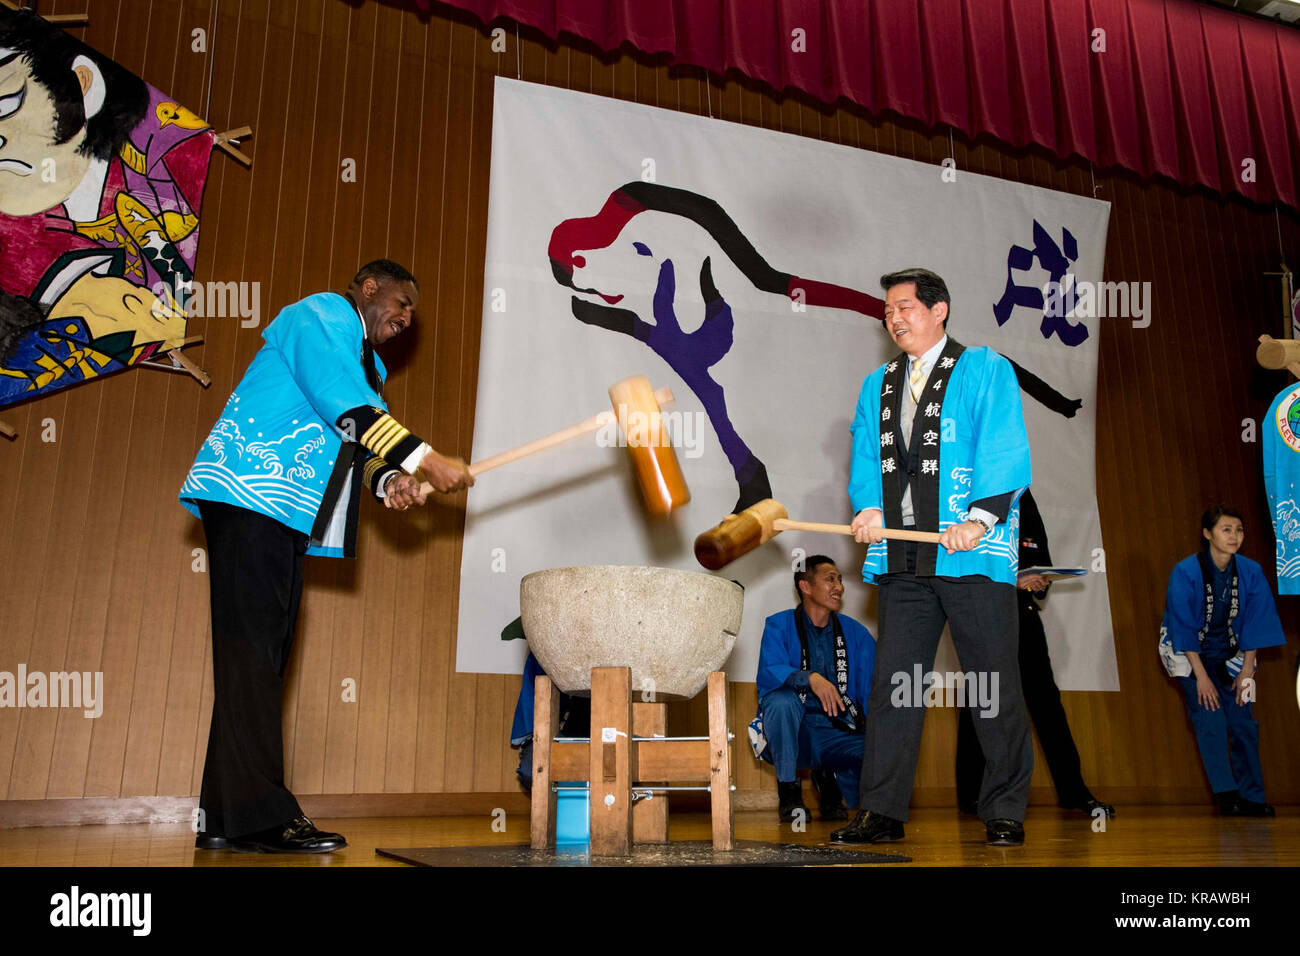 NAVAL AIR FACILITY ATSUGI, Japan (Dec. 13, 2017) Capt. Lloyd B. Mack, (L) Naval Air Facility Atsugi commanding officer, swings a kine (wooden mallet) to pound rice during the annual Japan Maritime Self-Defense Force, Commander, Fleet Air Wing Four mochi-tsuki (rice pounding) event. Mochi-tsuki events in Japan are traditionally held to mark special occasions, especially the New Year. (U.S. Navy Stock Photo